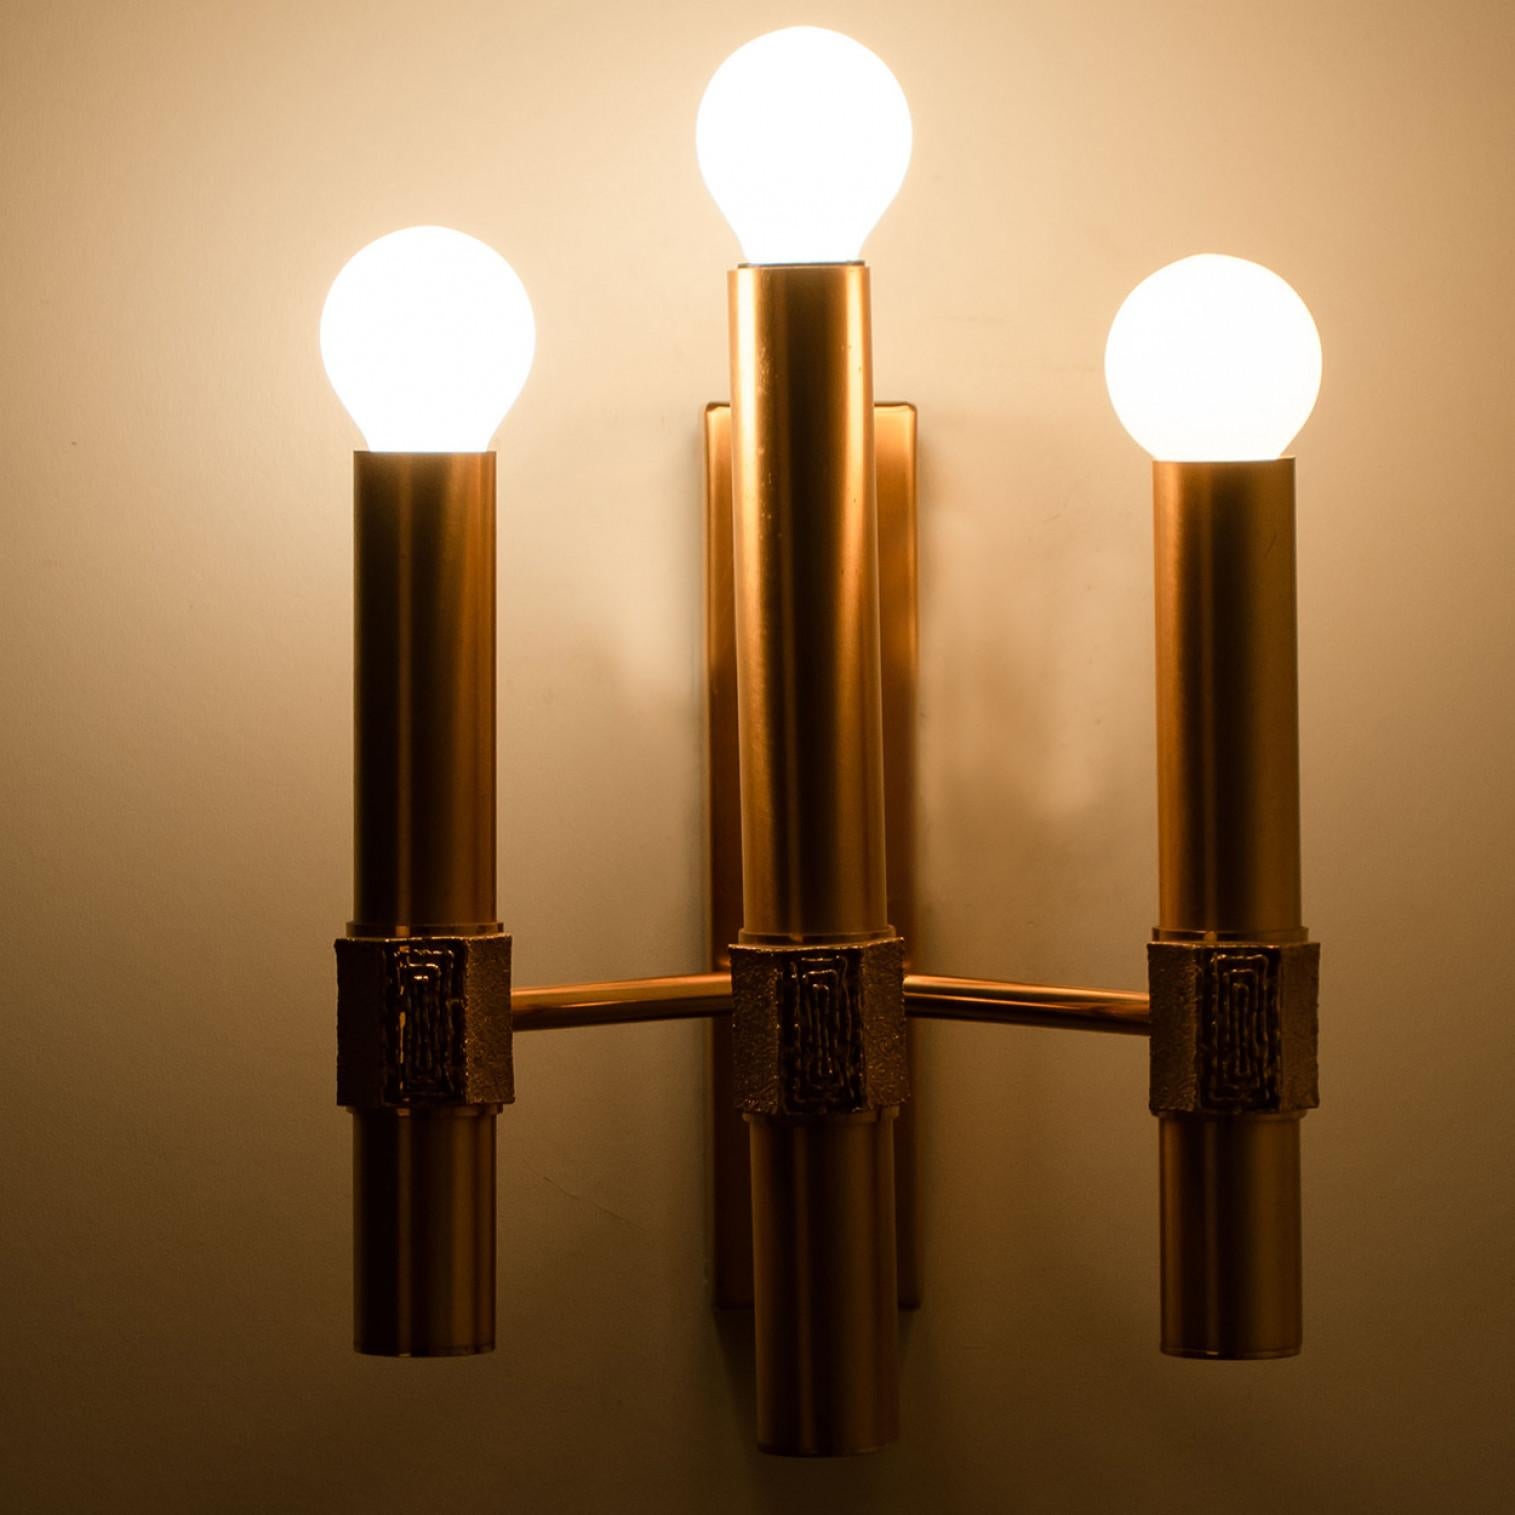 Beautiful wall light by Angelo Brotto, brass structure with 3 arms. The light consists of 3 brass arms, each with a light bulb on top. Each brass arm has a small structured piece on the front, to create a classy finish.

Dimensions:
Height: 11.81